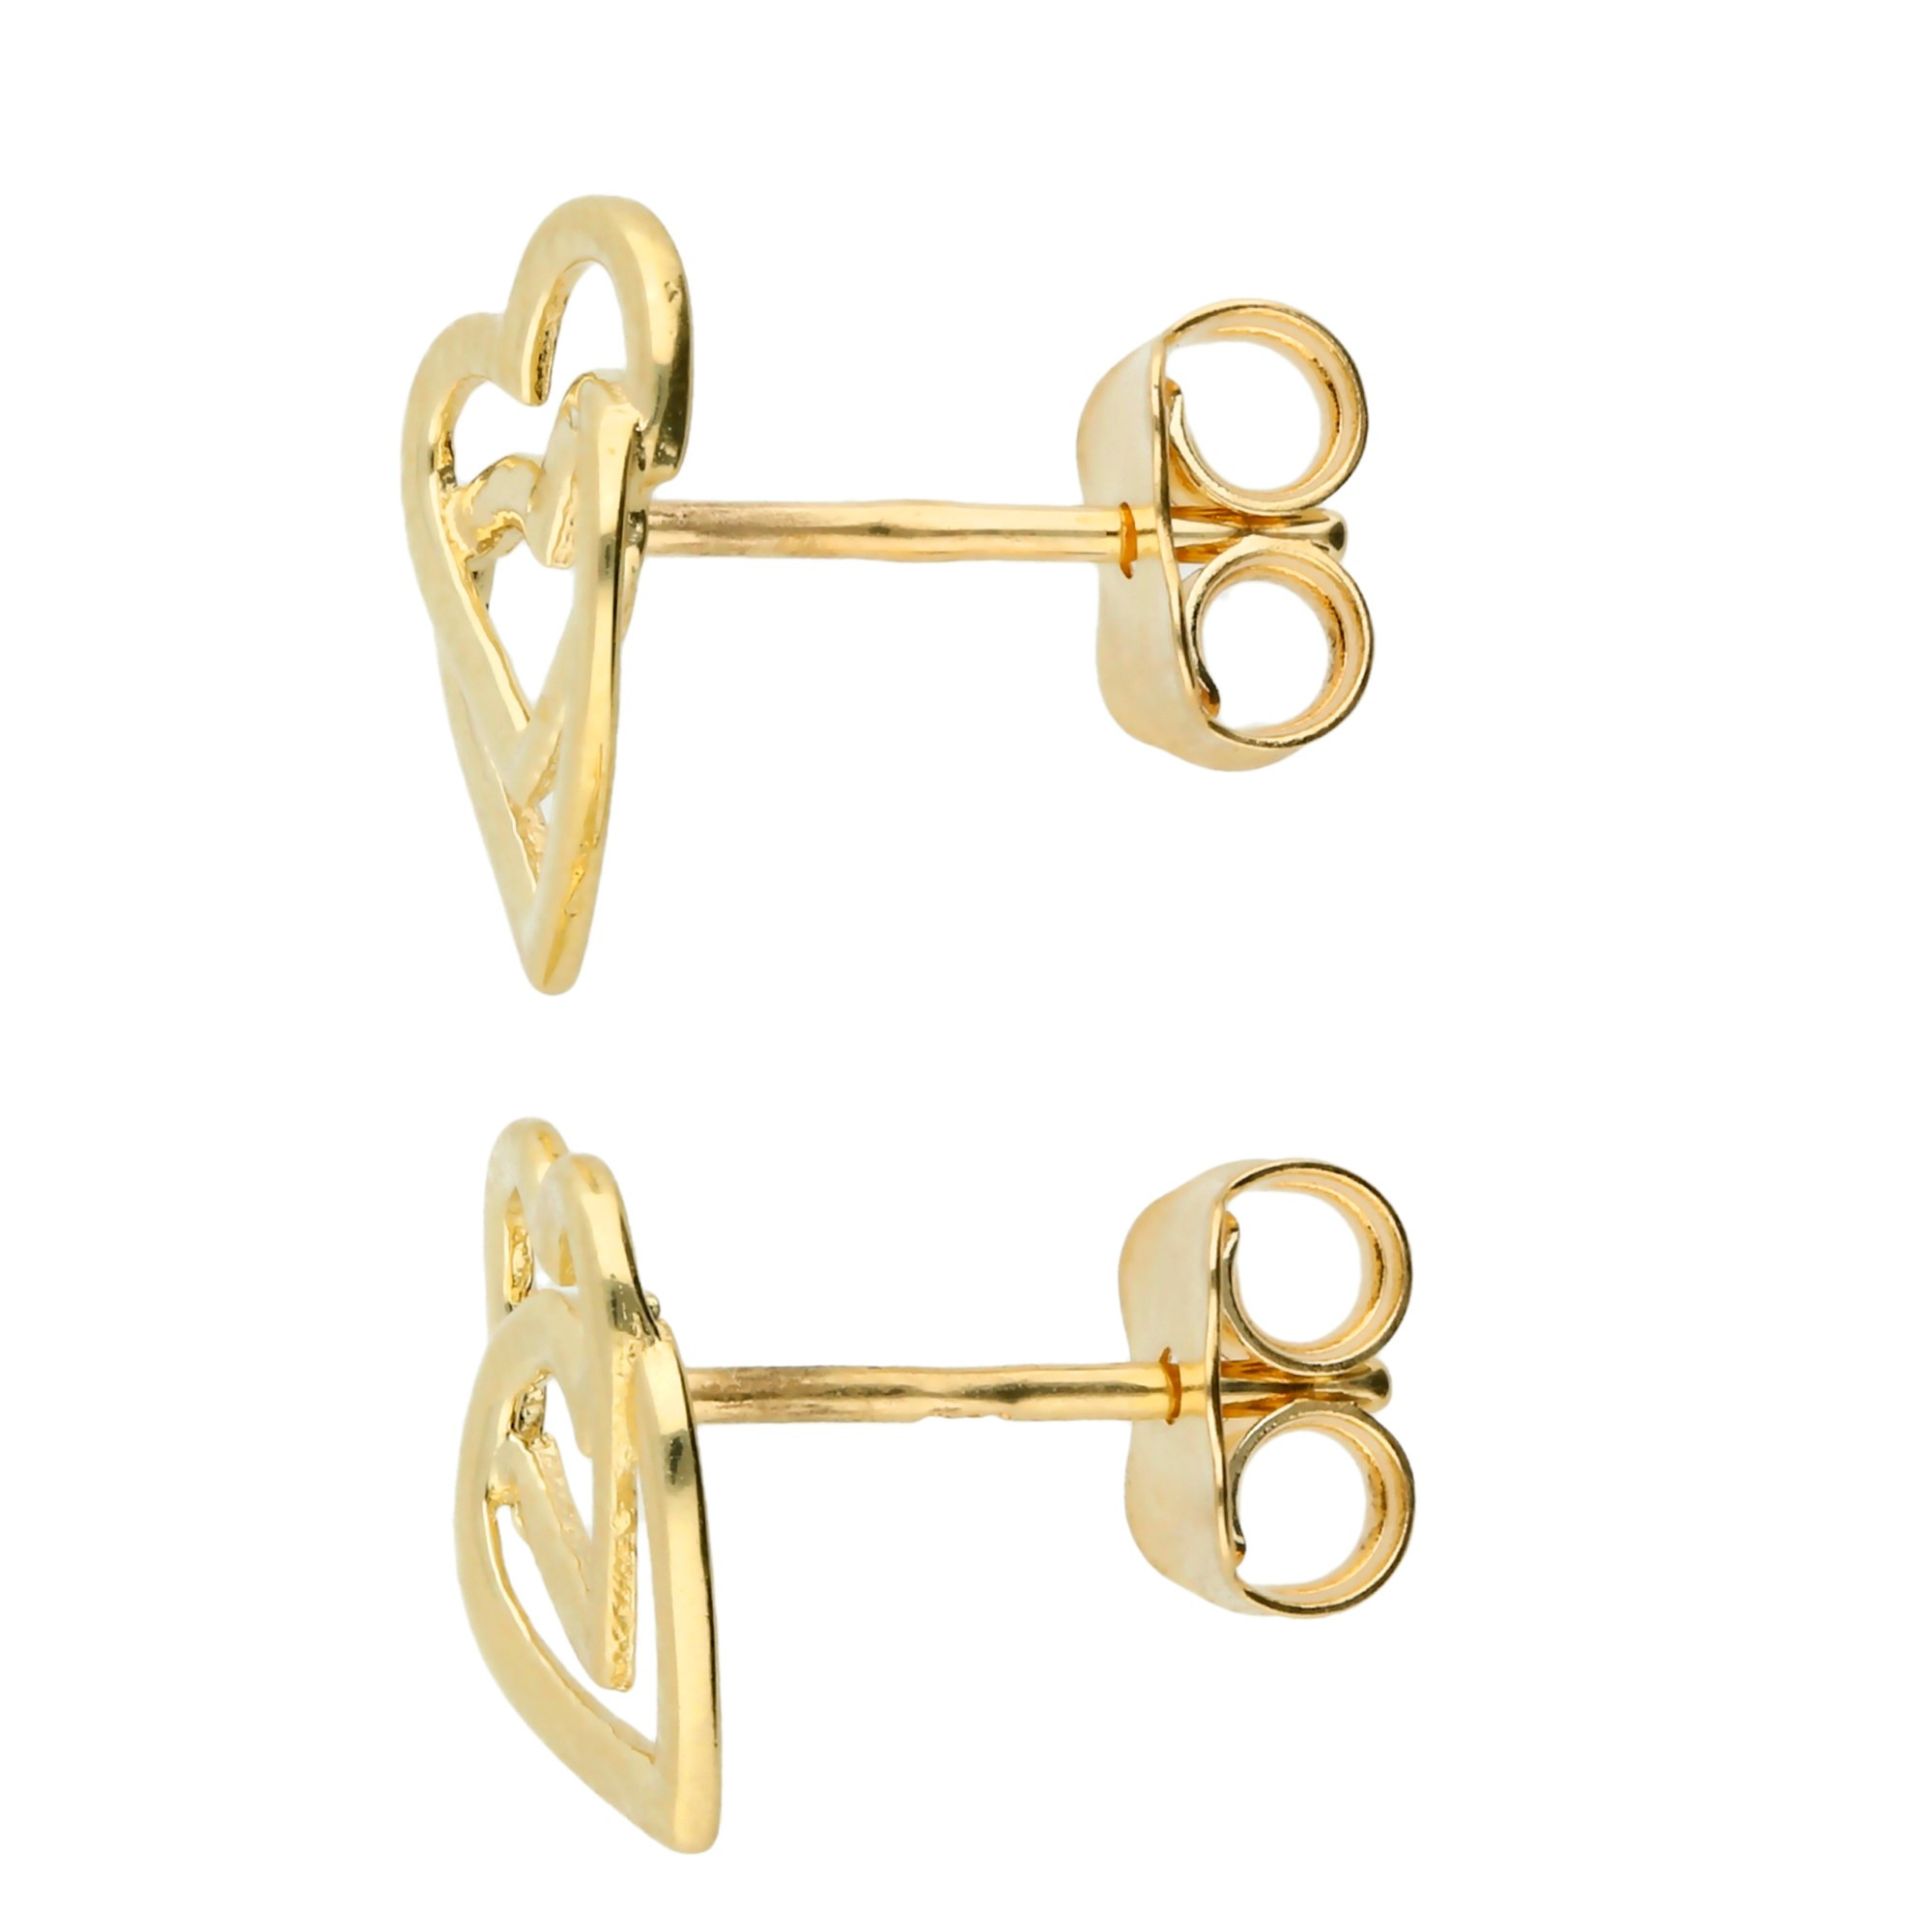 9ct Gold Square Heart Gift Stud Earrings Gift Boxed Made in UK 